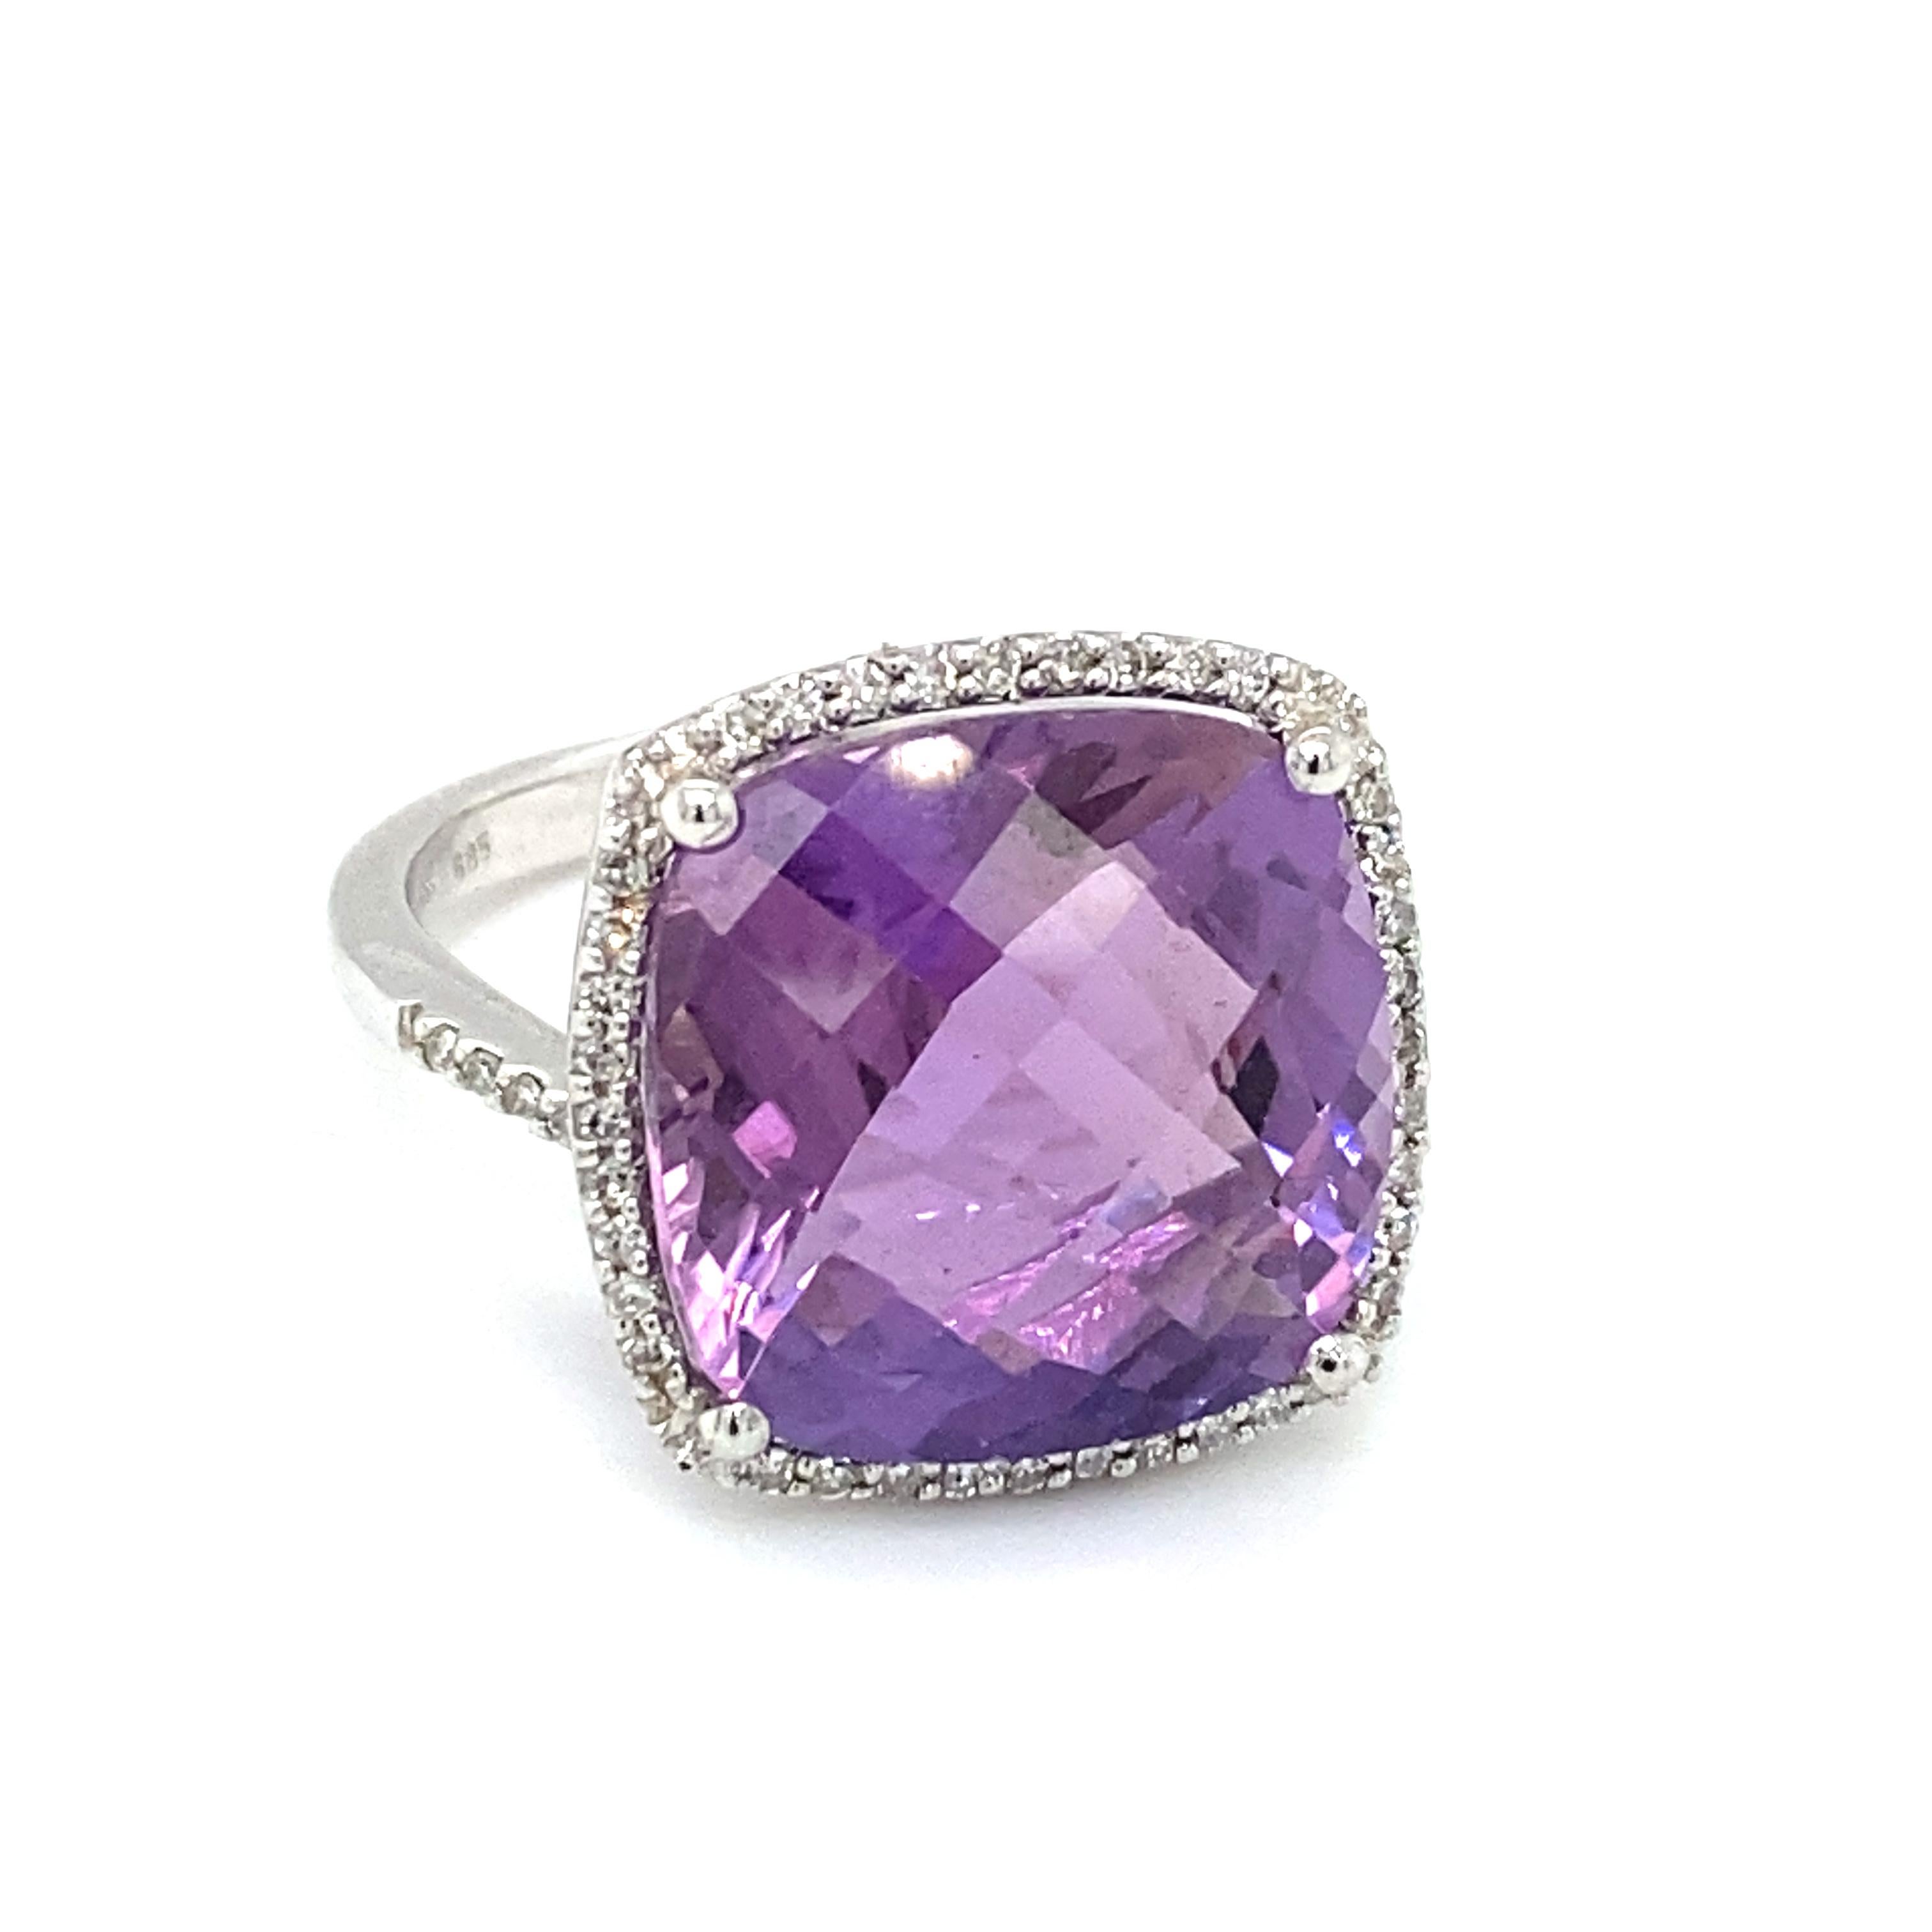 Modern 2000s 8 Carat Amethyst and Diamond Cocktail Ring in 14 Karat White Gold For Sale